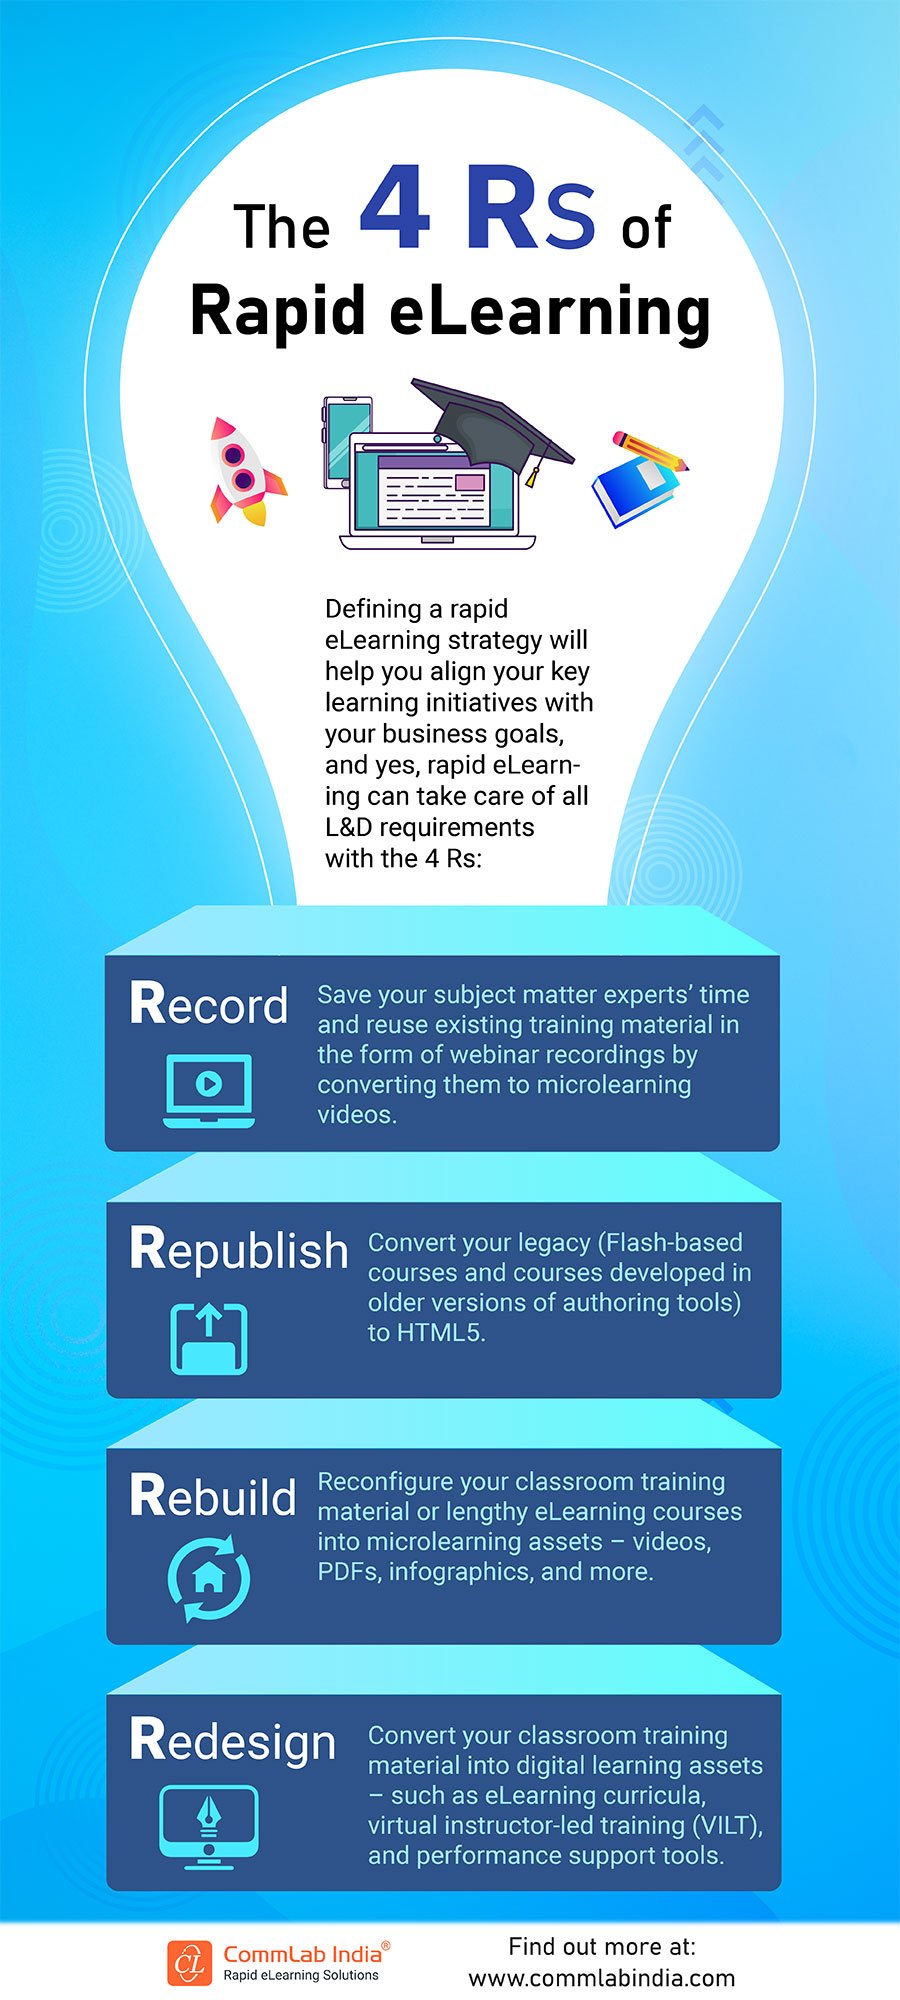 Rapid eLearning and the 4Rs